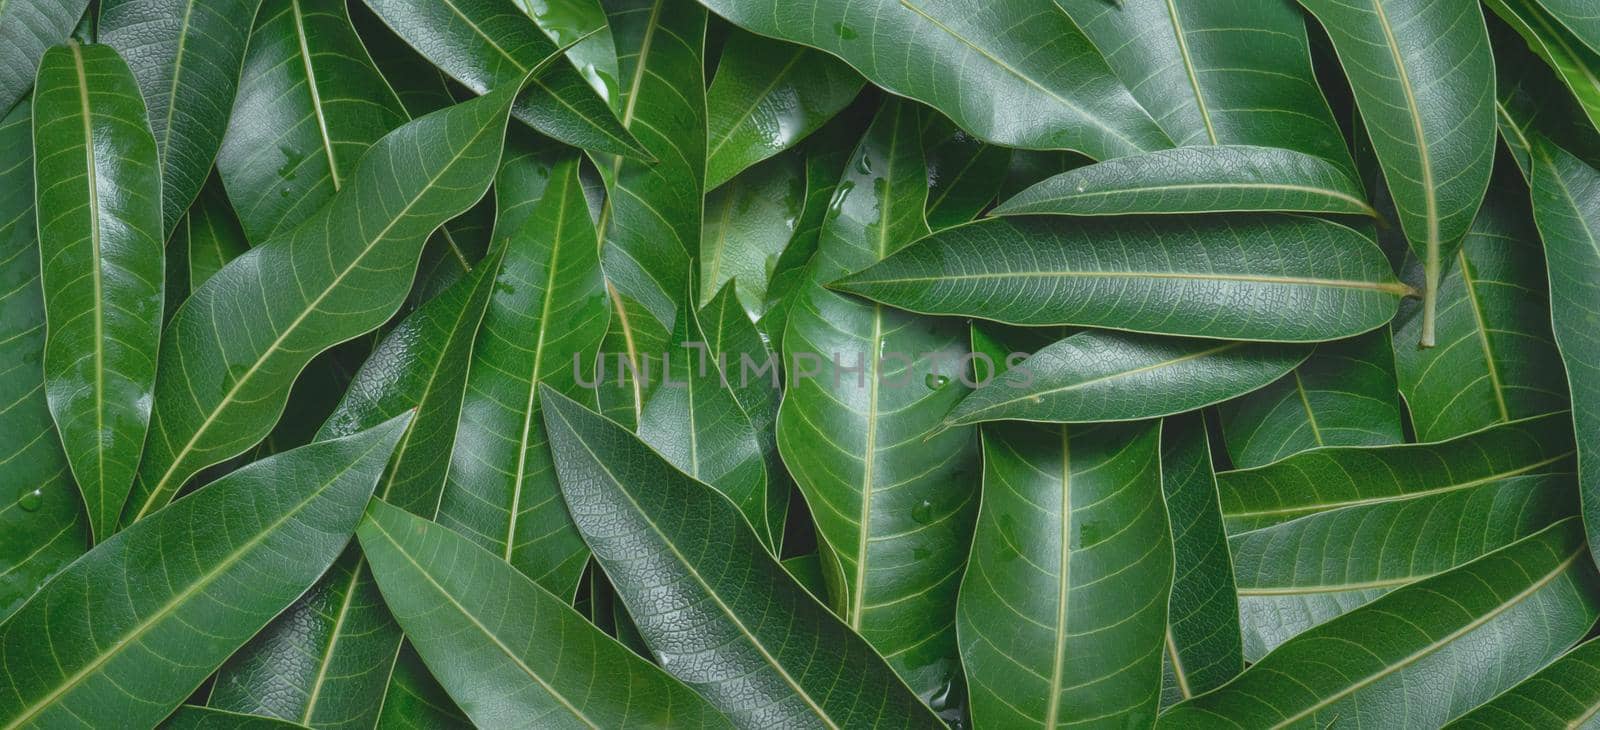 Mango leaves background, beautiful fresh green group with clear leaf vein texture detail, copy space, top view, close up, macro. Tropical concept. by ROMIXIMAGE